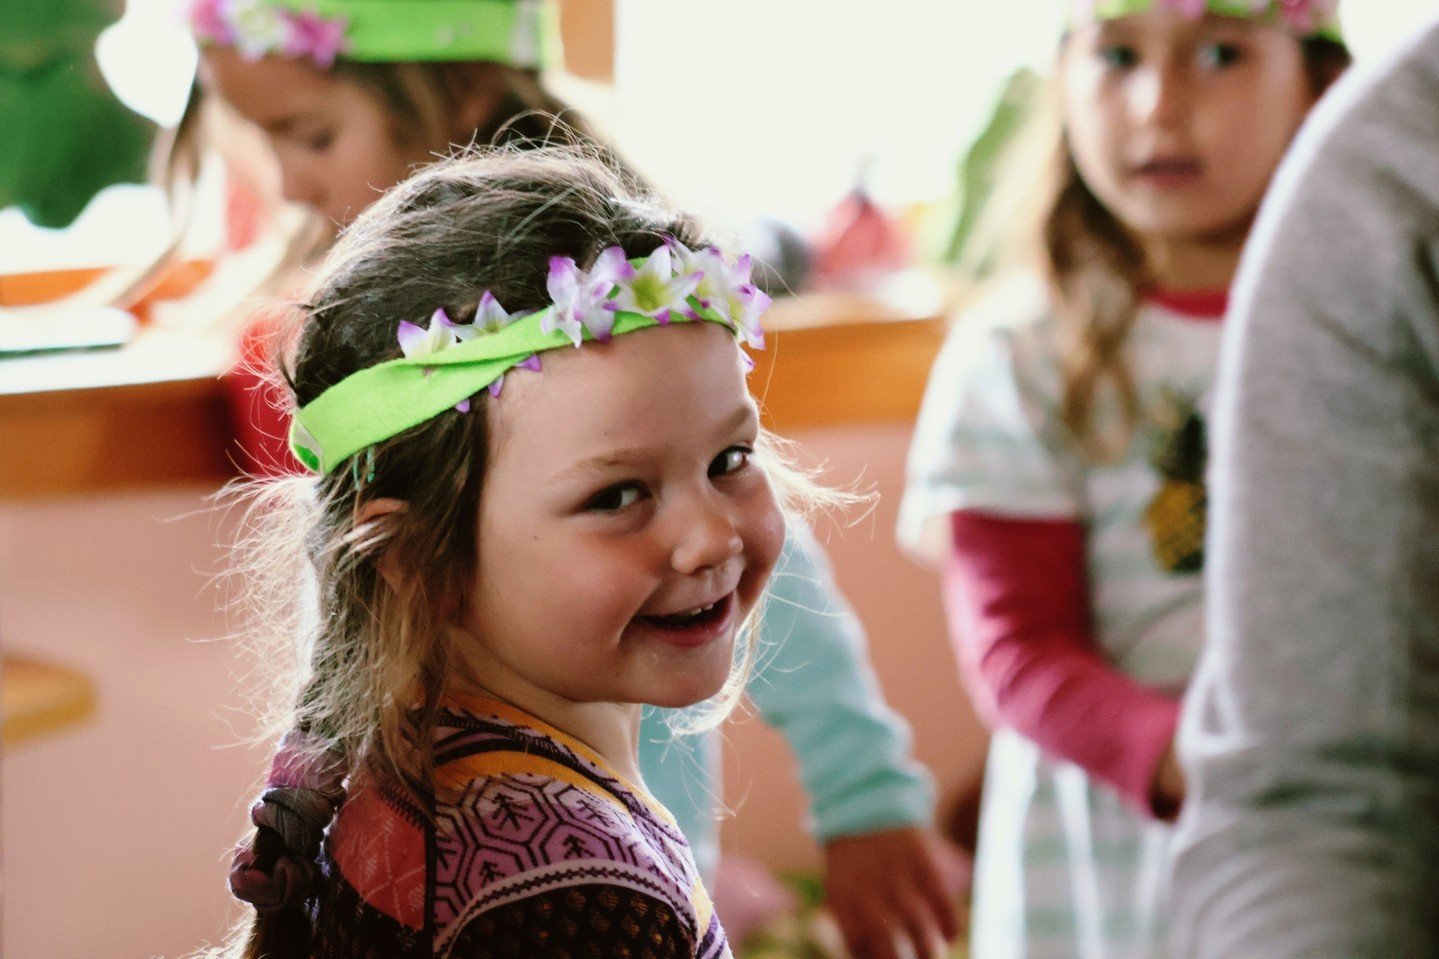 We're getting ready for MayFaire! Our youngest students prepare a smaller celebration of music and dance for their parents, but they love to come on Saturday to watch the big kids weave their maypole!⁠
⁠
#mayfaire #springfestival #mayday #beltane #ma